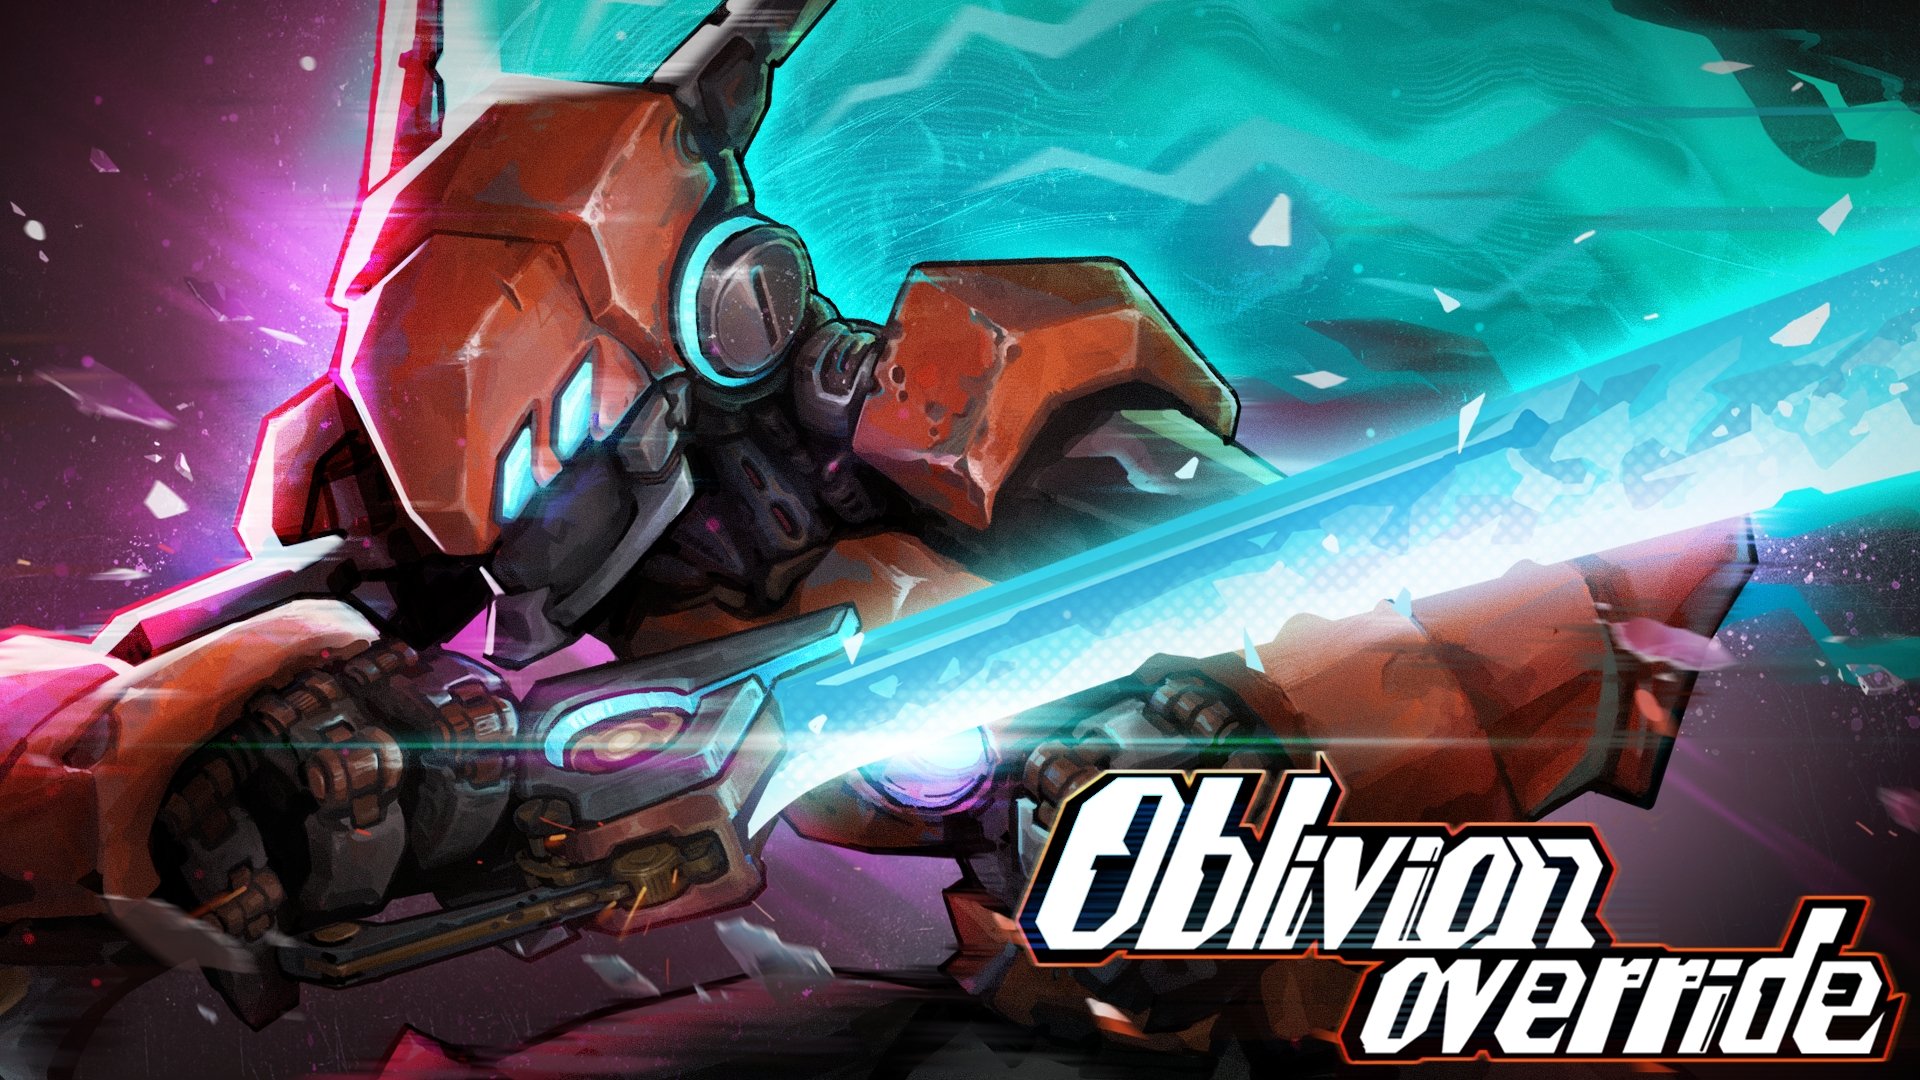 #
      Side-scrolling roguelike action game Oblivion Override announced for consoles, PC